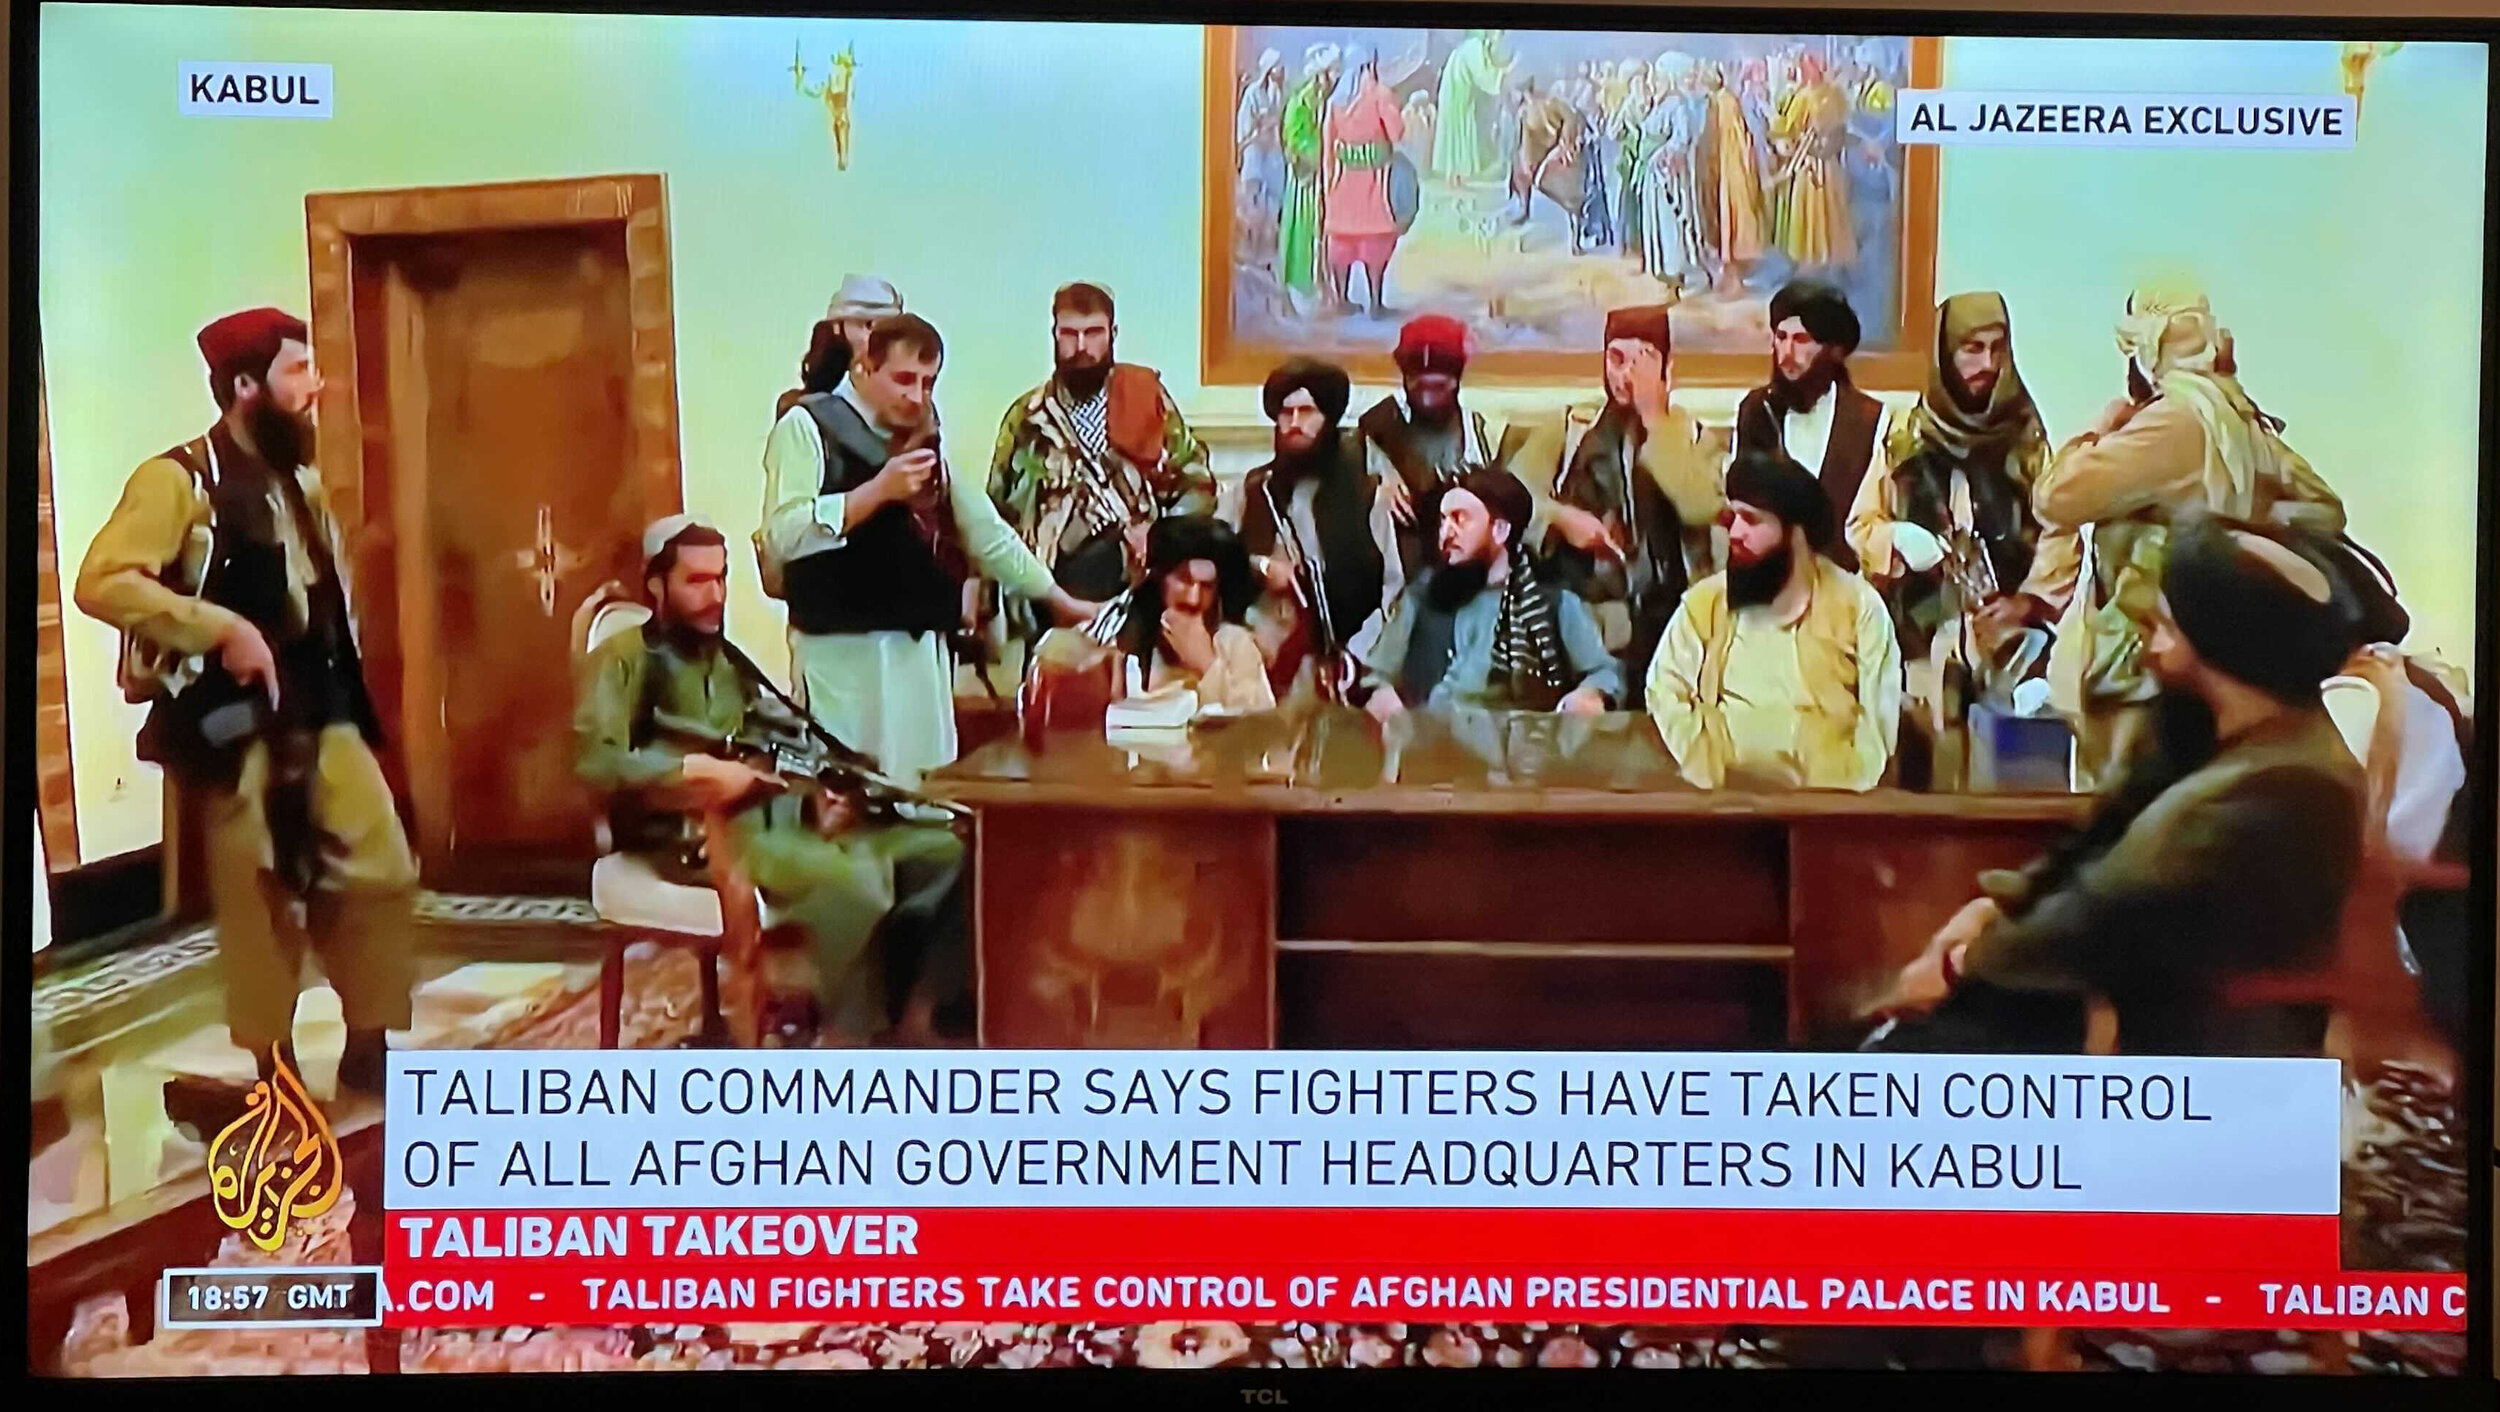 PICTURED: Al-Jazeera livestreamed the address from the Taliban commander at the presidential palace. PC: Al-Jazeera. Fair Use.